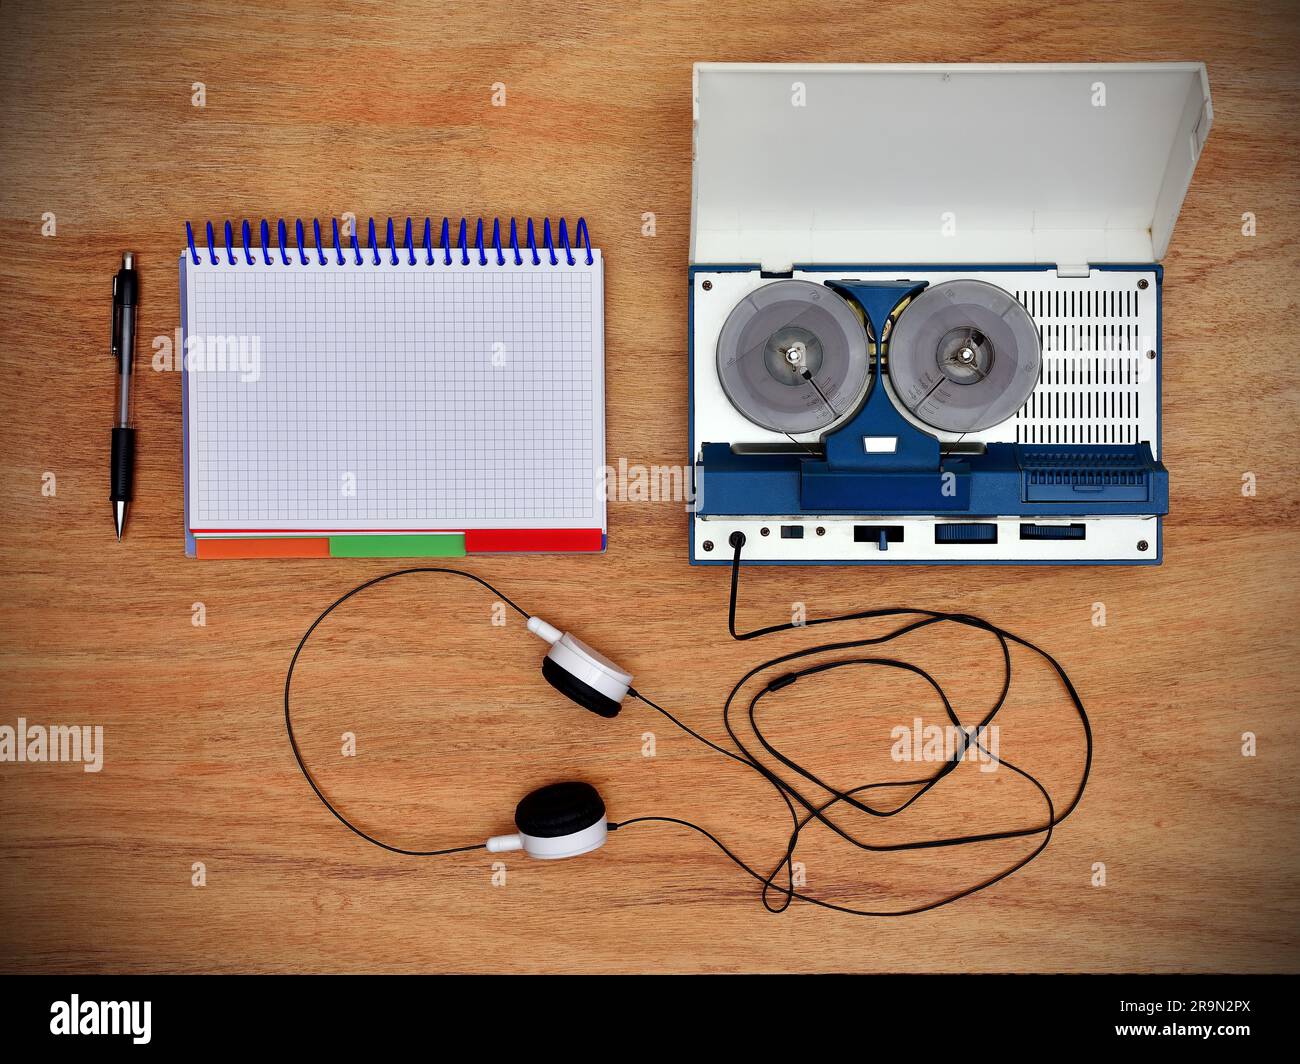 Reel tape recorder with headphones and blank notepad on wooden table. View from above Stock Photo